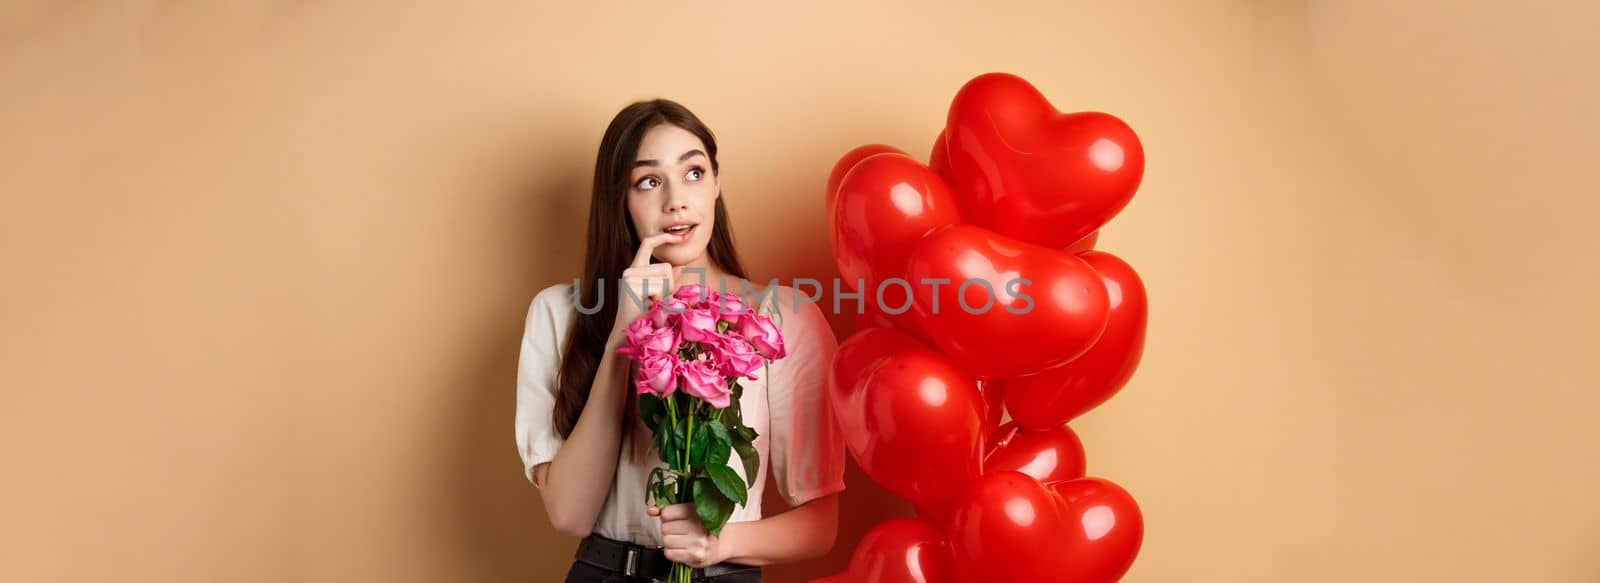 Dreamy young woman holding bouquet of roses and thinking about secret admirer on Valentines day, looking at upper left corner and biting finger, standing near red romantic balloons by Benzoix